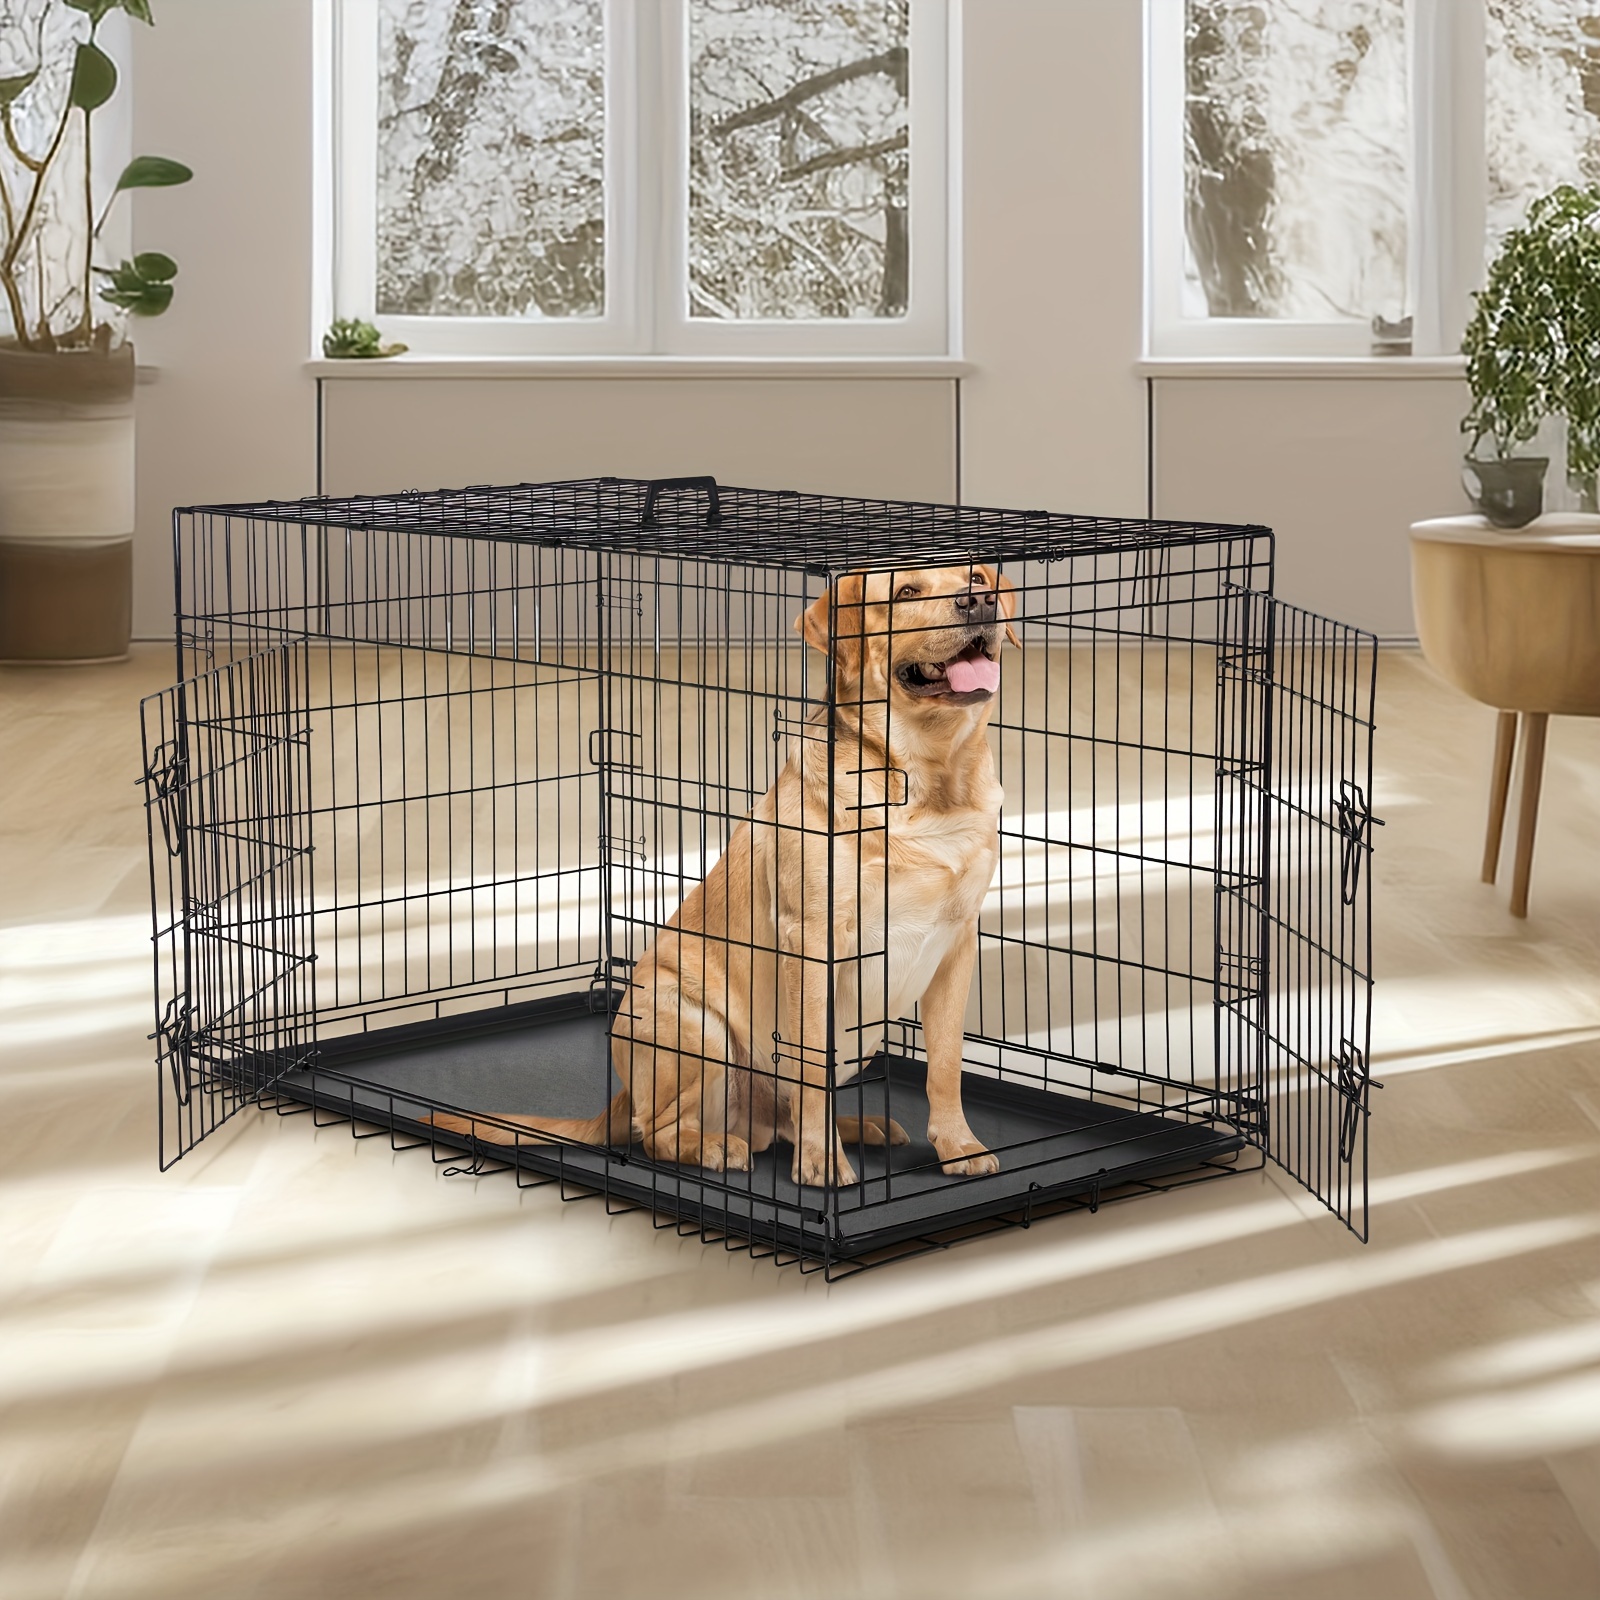 

Dumos 36 Inch Medium Large Dog Crate With Divider Panel, Double Door Folding Metal Wire Dog Cage With Plastic Leak-proof Pan Tray, Pet Kennel For Indoor, Outdoor, Travel